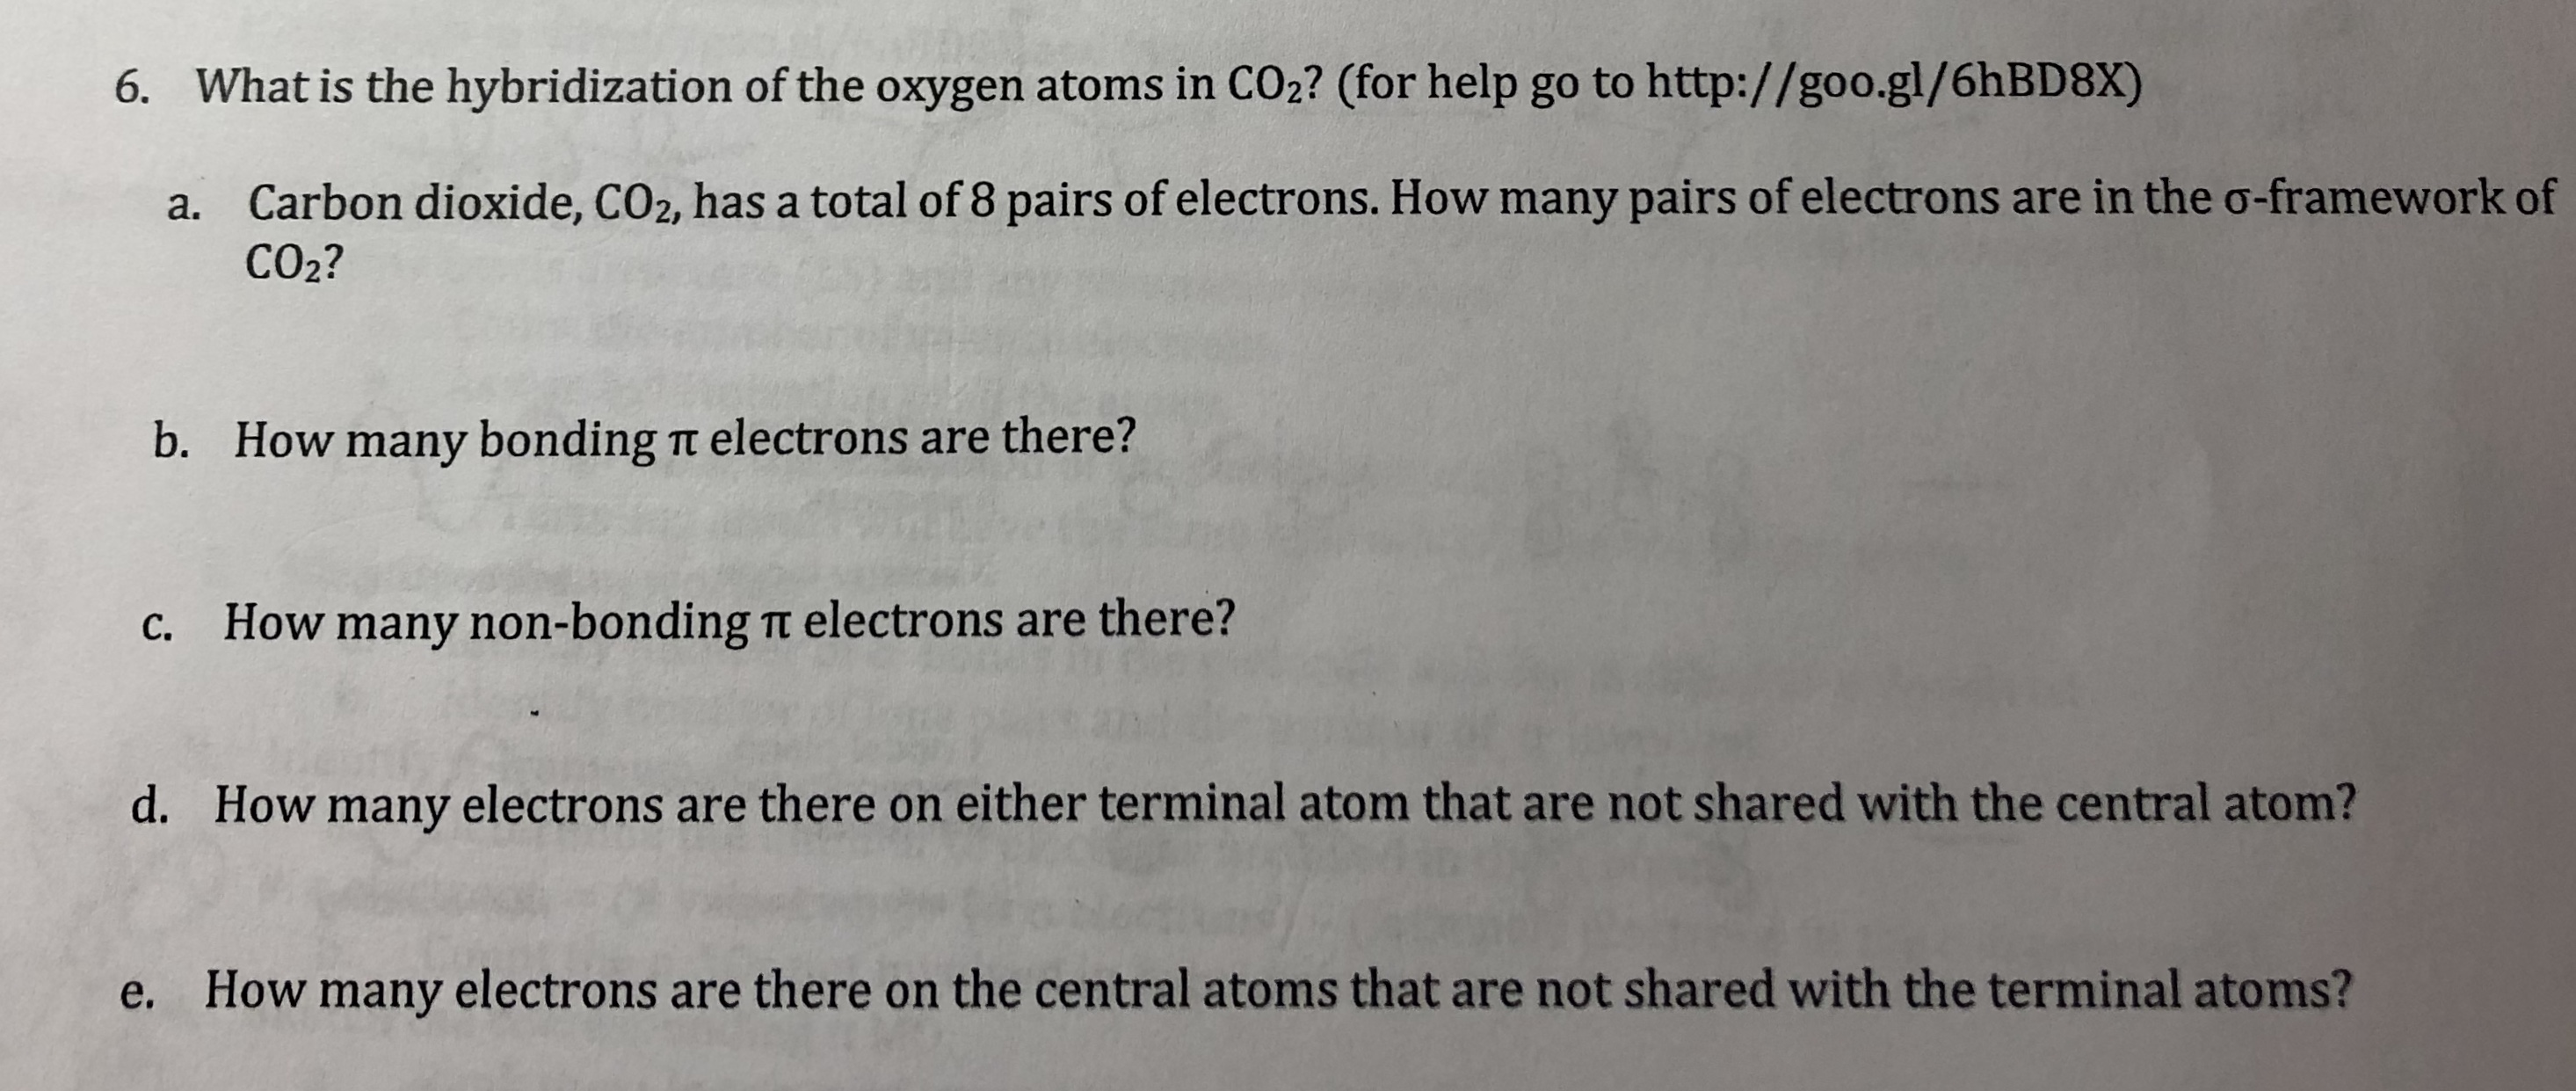 6.
What is the hybridization of the oxygen atoms in CO2? (for help go to http://goo.gl/6hBD8X)
Carbon dioxide, CO2, has a total of 8 pairs of electrons. How many pairs of electrons are in the σ-framework of
CO2?
a.
b. How many bonding t electrons are there?
c. How many non-bonding it electrons are there?
d.
How many electrons are there on either terminal atom that are not shared with the central atom?
e.
How many electrons are there on the central atoms that are not shared with the terminal atoms?
